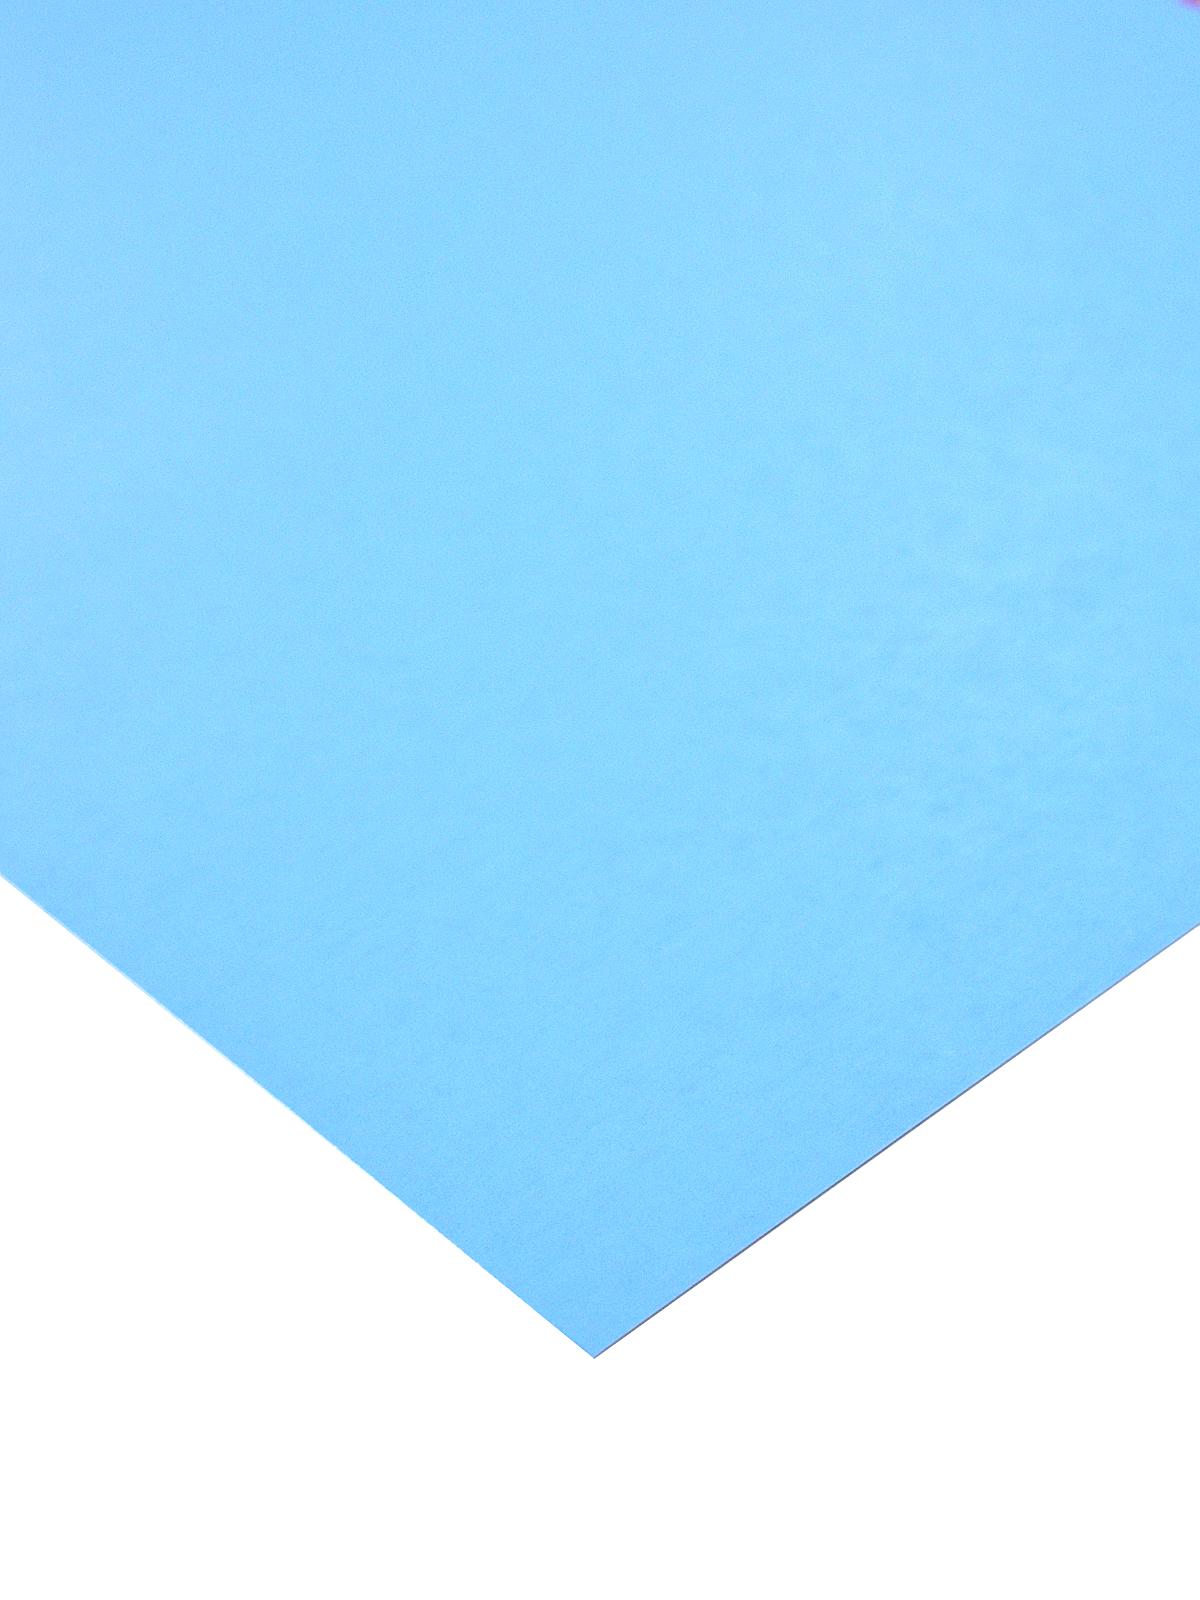 The Heavy Poster Board Light Blue